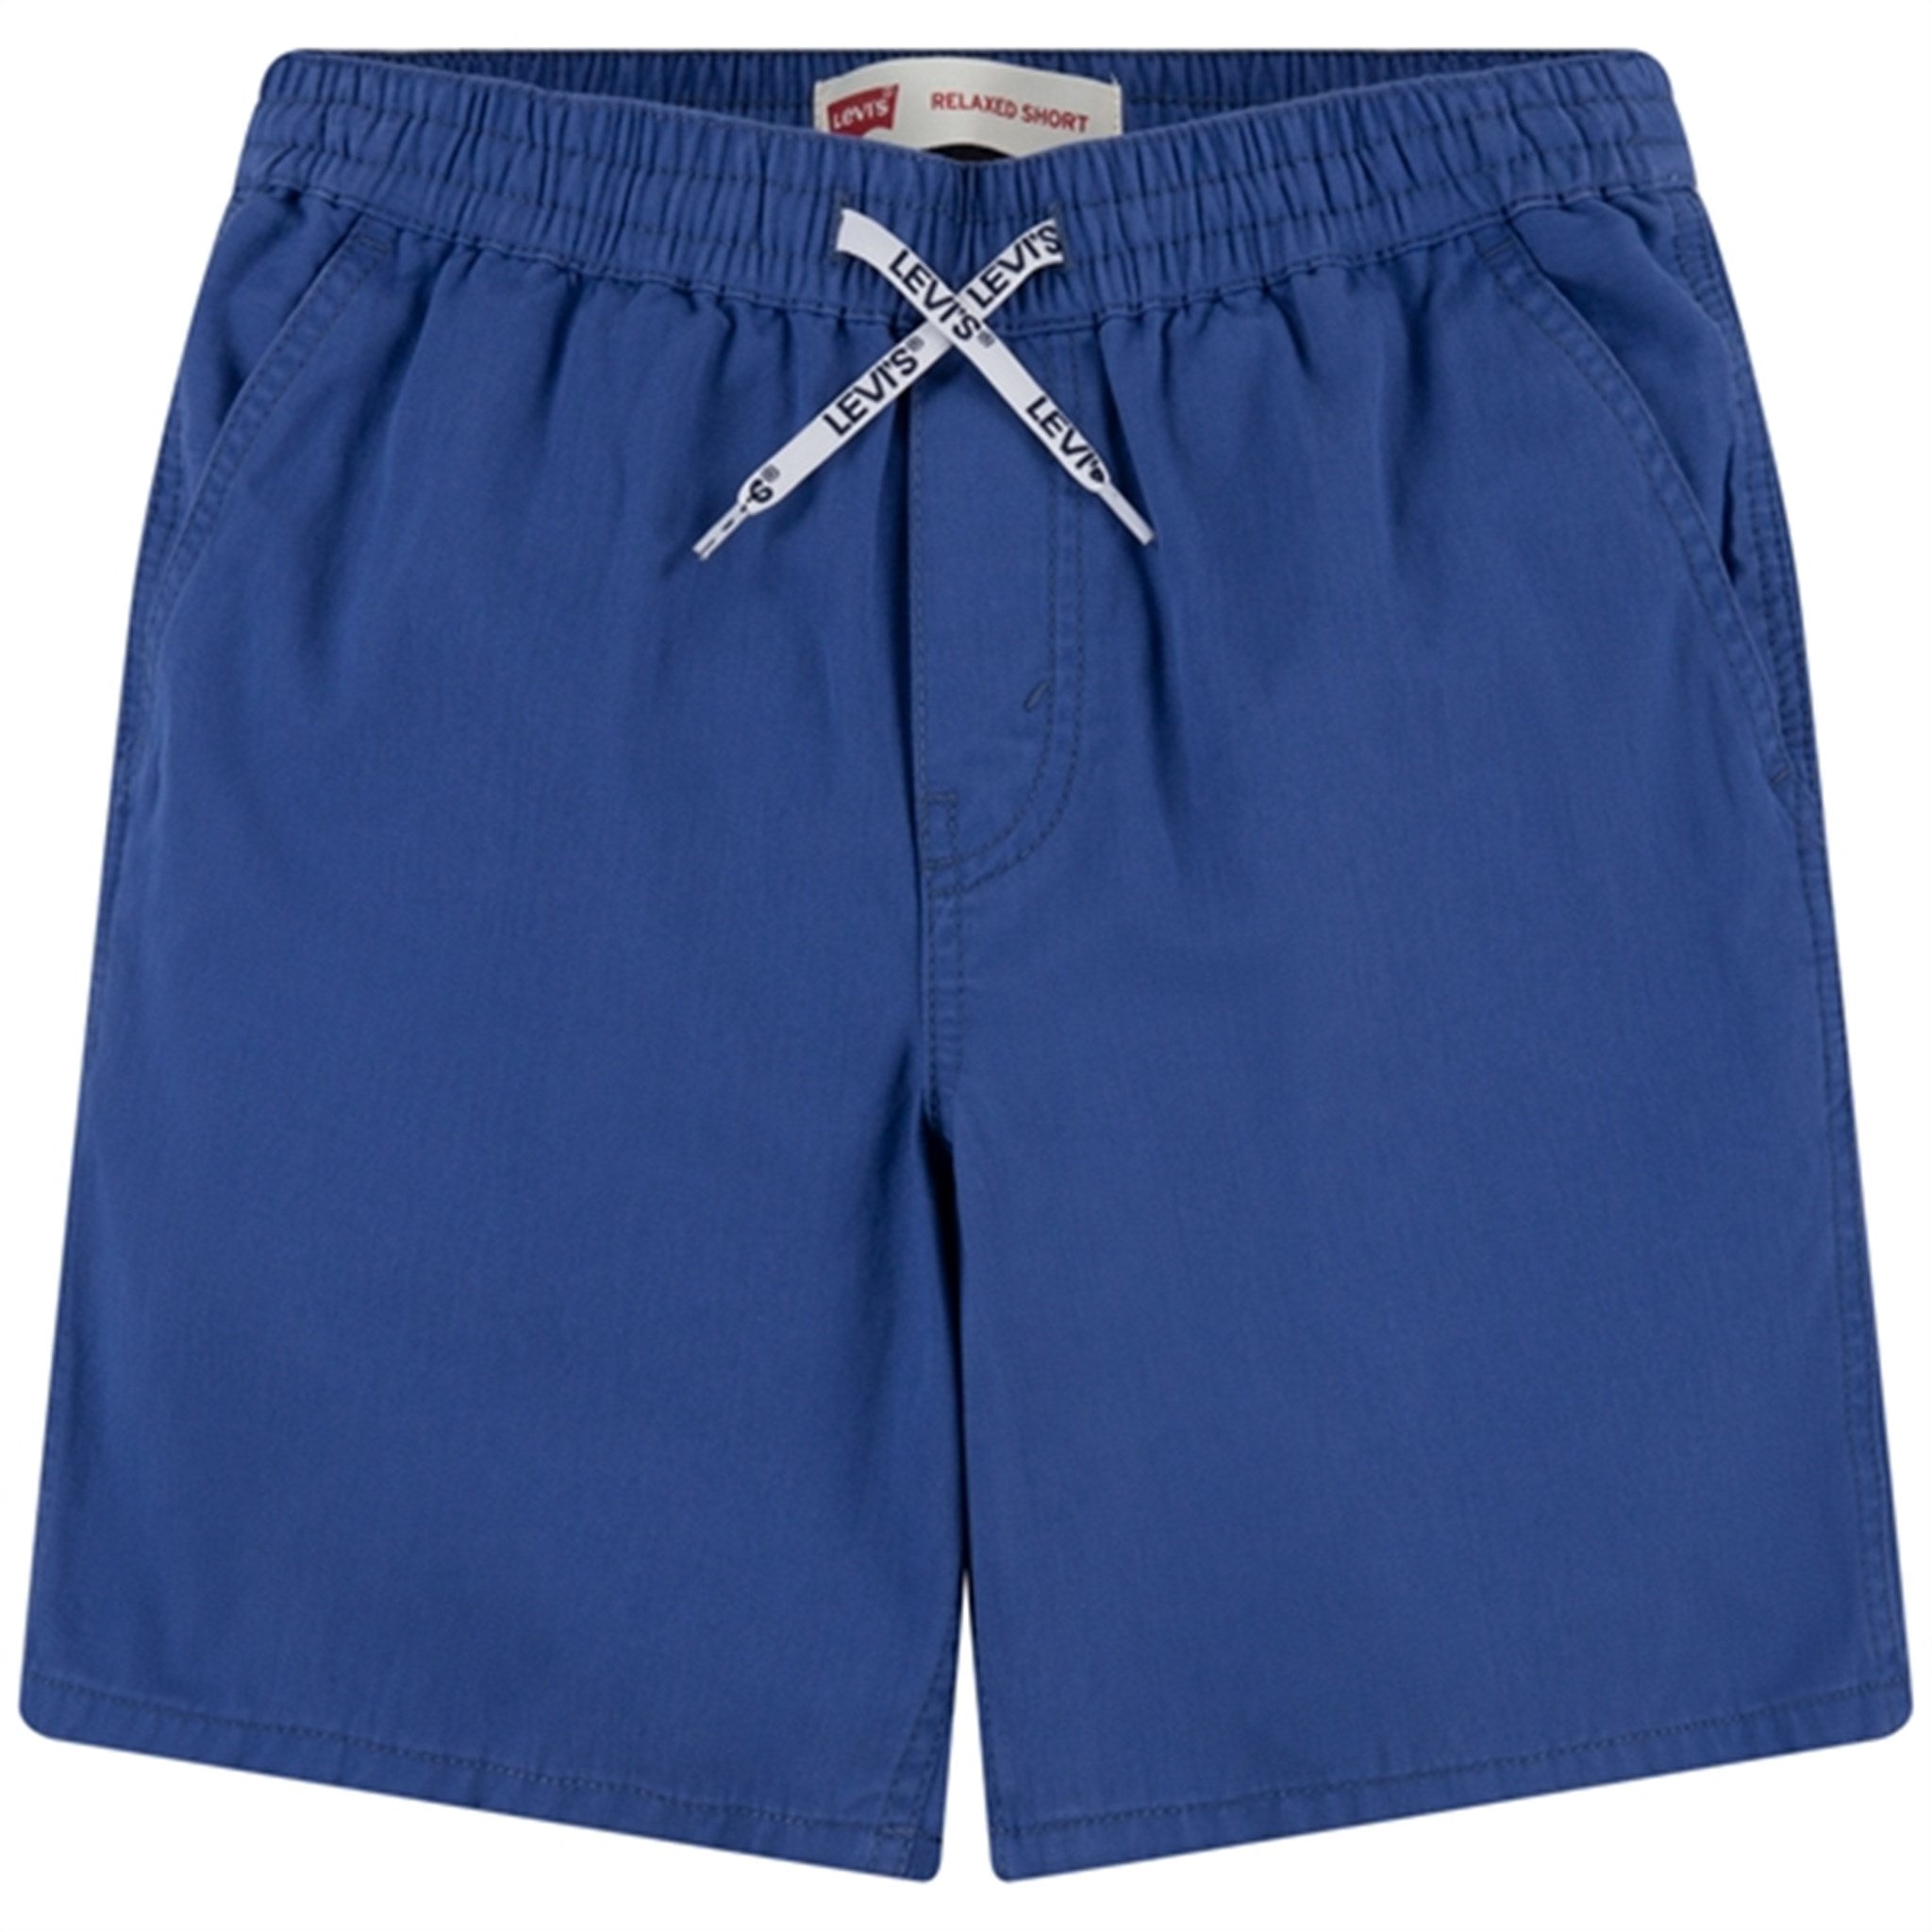 Levi's Woven Pull-On Shorts Blue